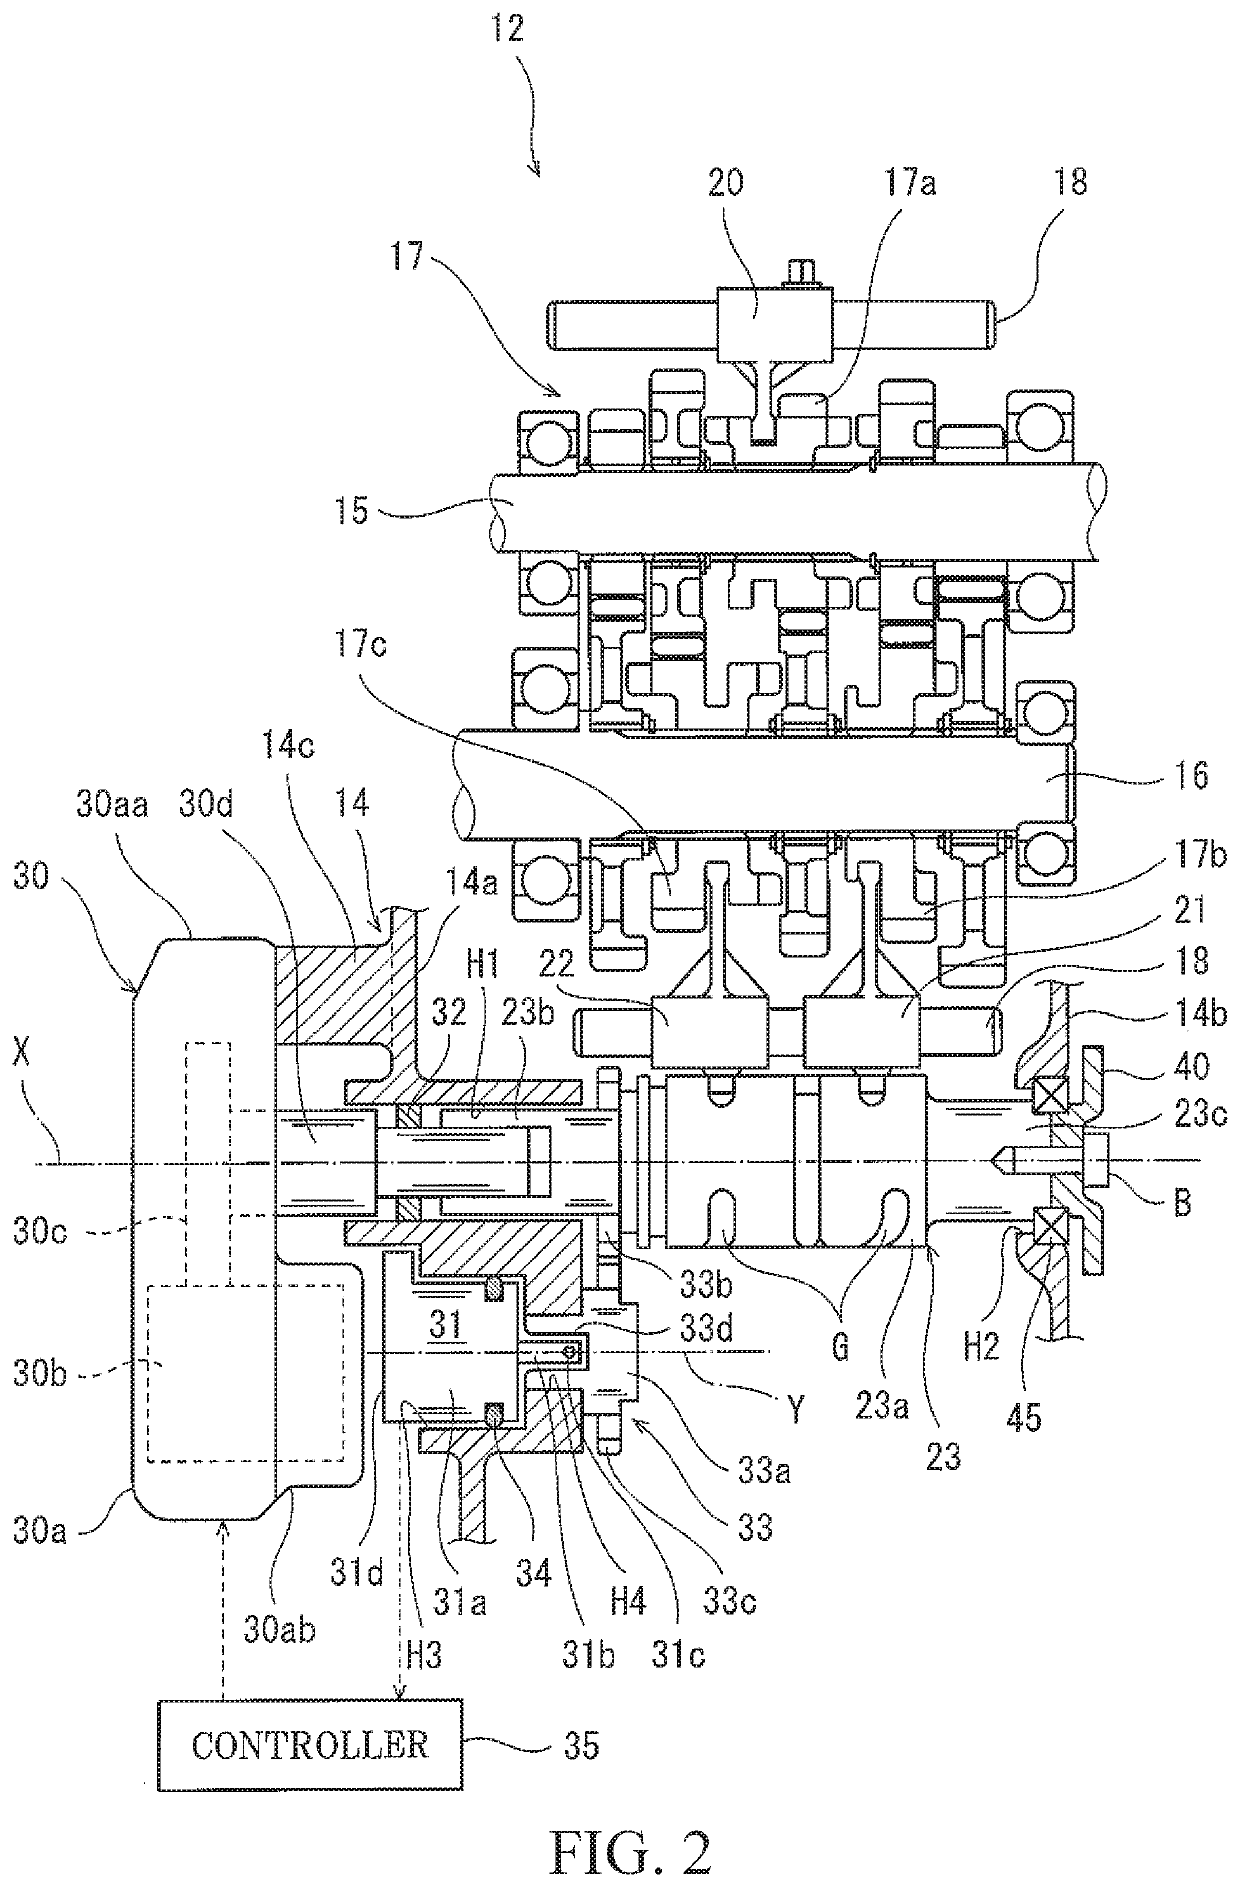 Transmission mechanism including shift drum and actuator unit which are coaxially disposed